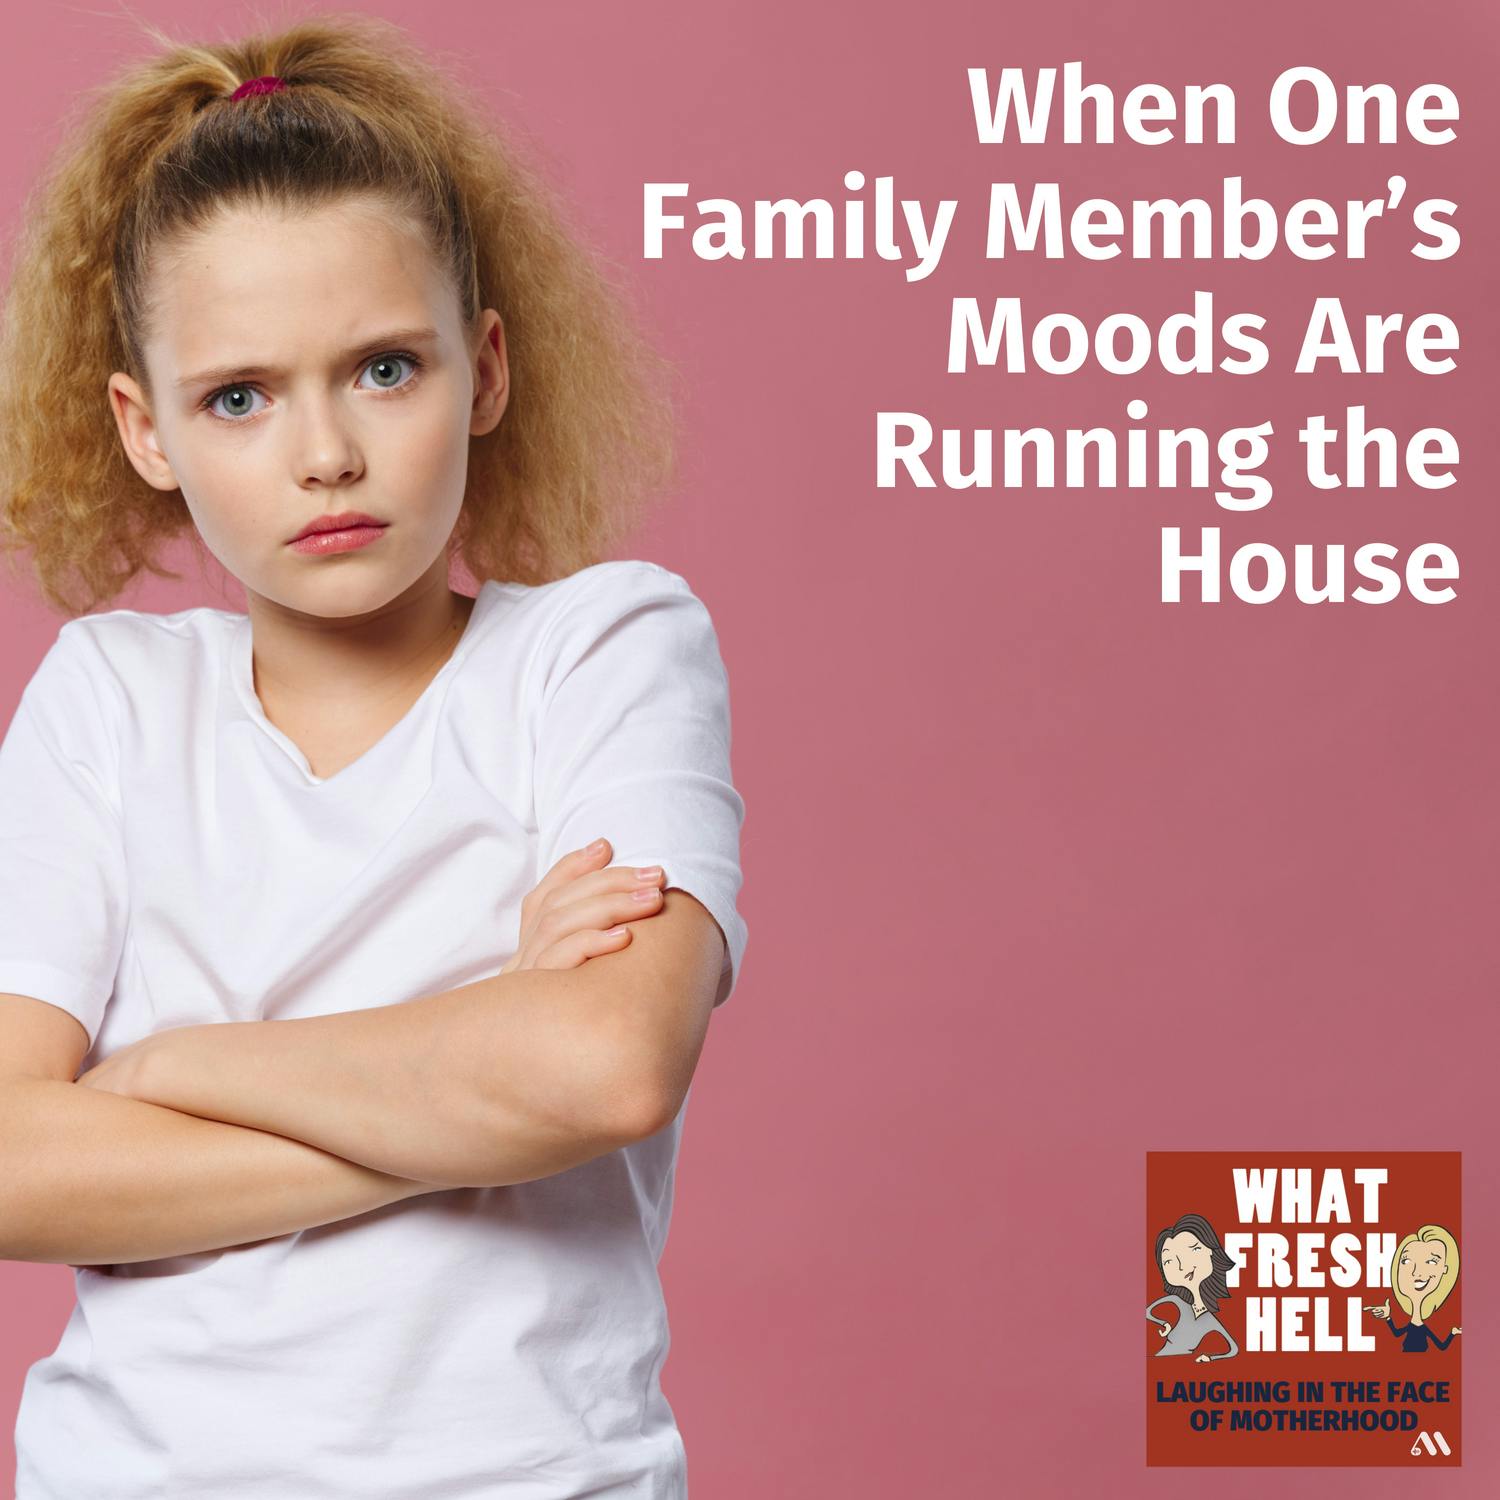 When One Family Member's Moods Are Running the House